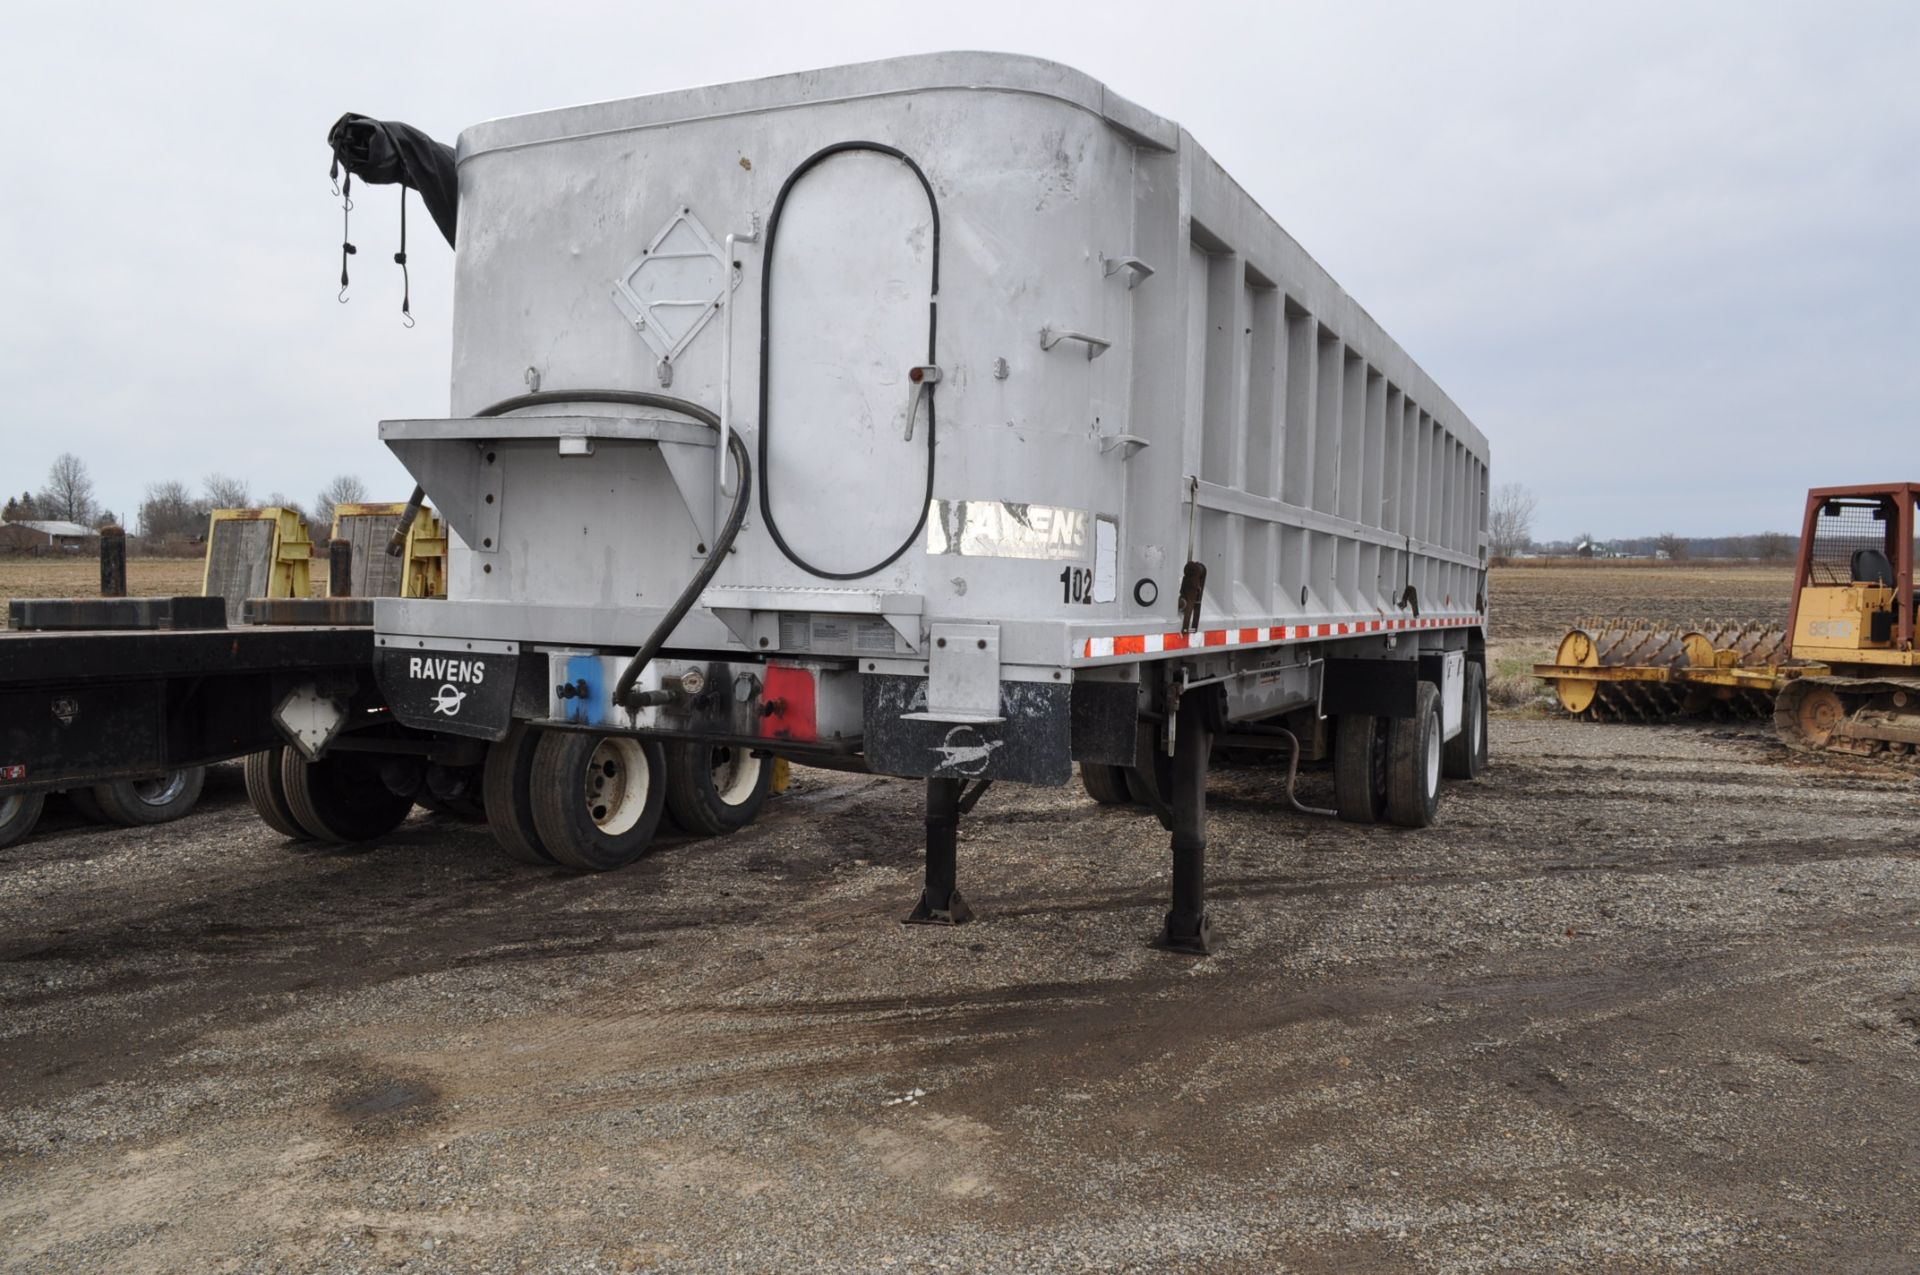 1993 34’ Ravens frame dump trailer, spread axle, low pro 22.5 tires, air ride, dble swing